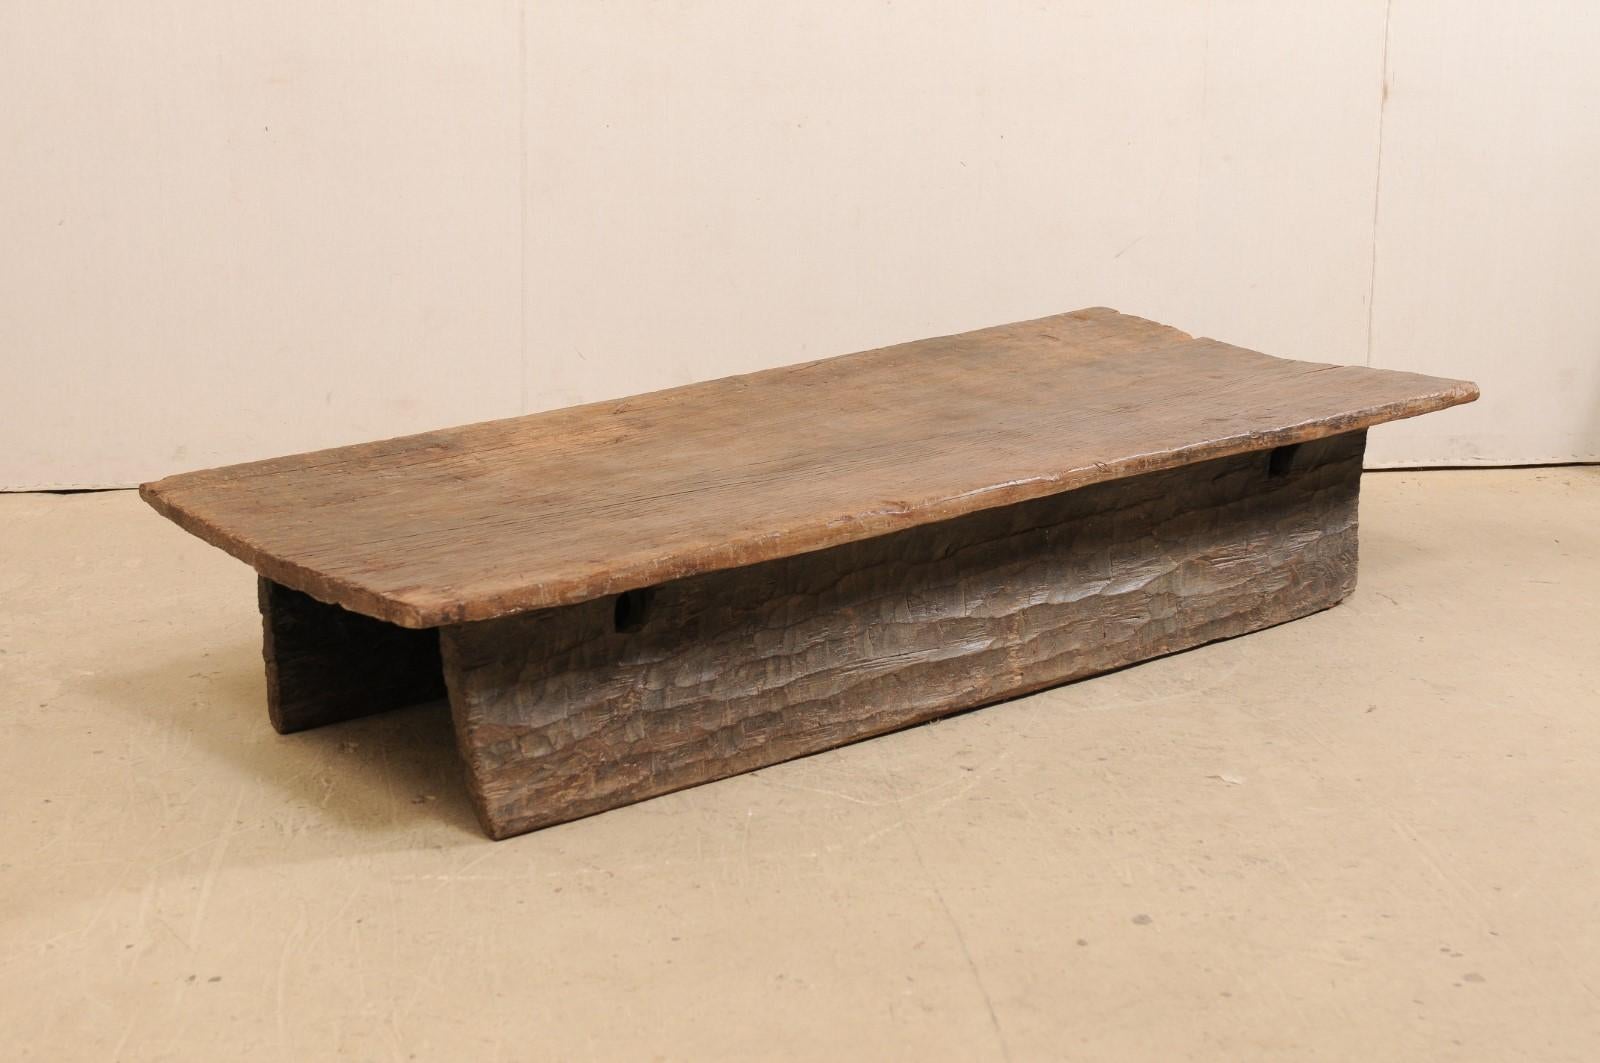 A Naga carved-wood table (or daybed) from the early 20th century. This antique coffee table would have originally been used as a wooden bed from the Naga tribes of Nagaland, North East India. This piece has been carved out of a single log! The